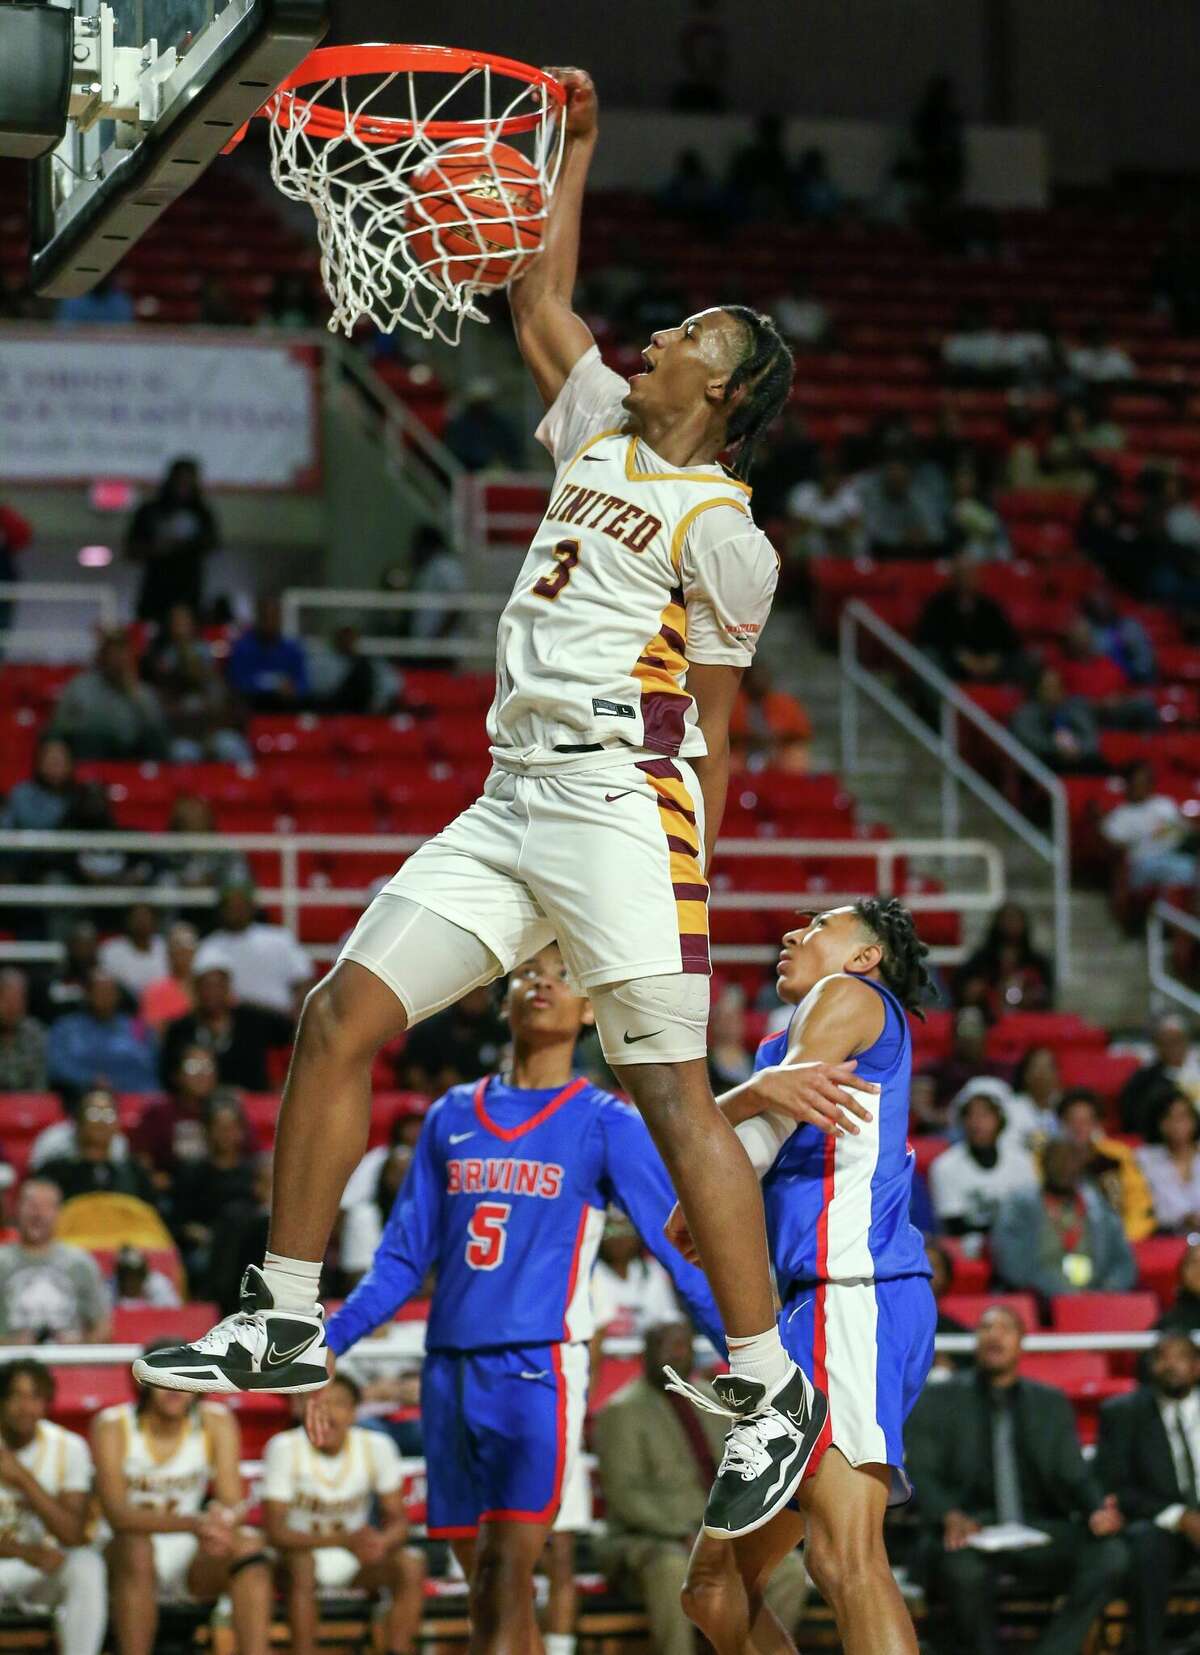 United guard Wesley Yates dunks the ball during a game against West Brook at the Montagne Center in Beaumont.